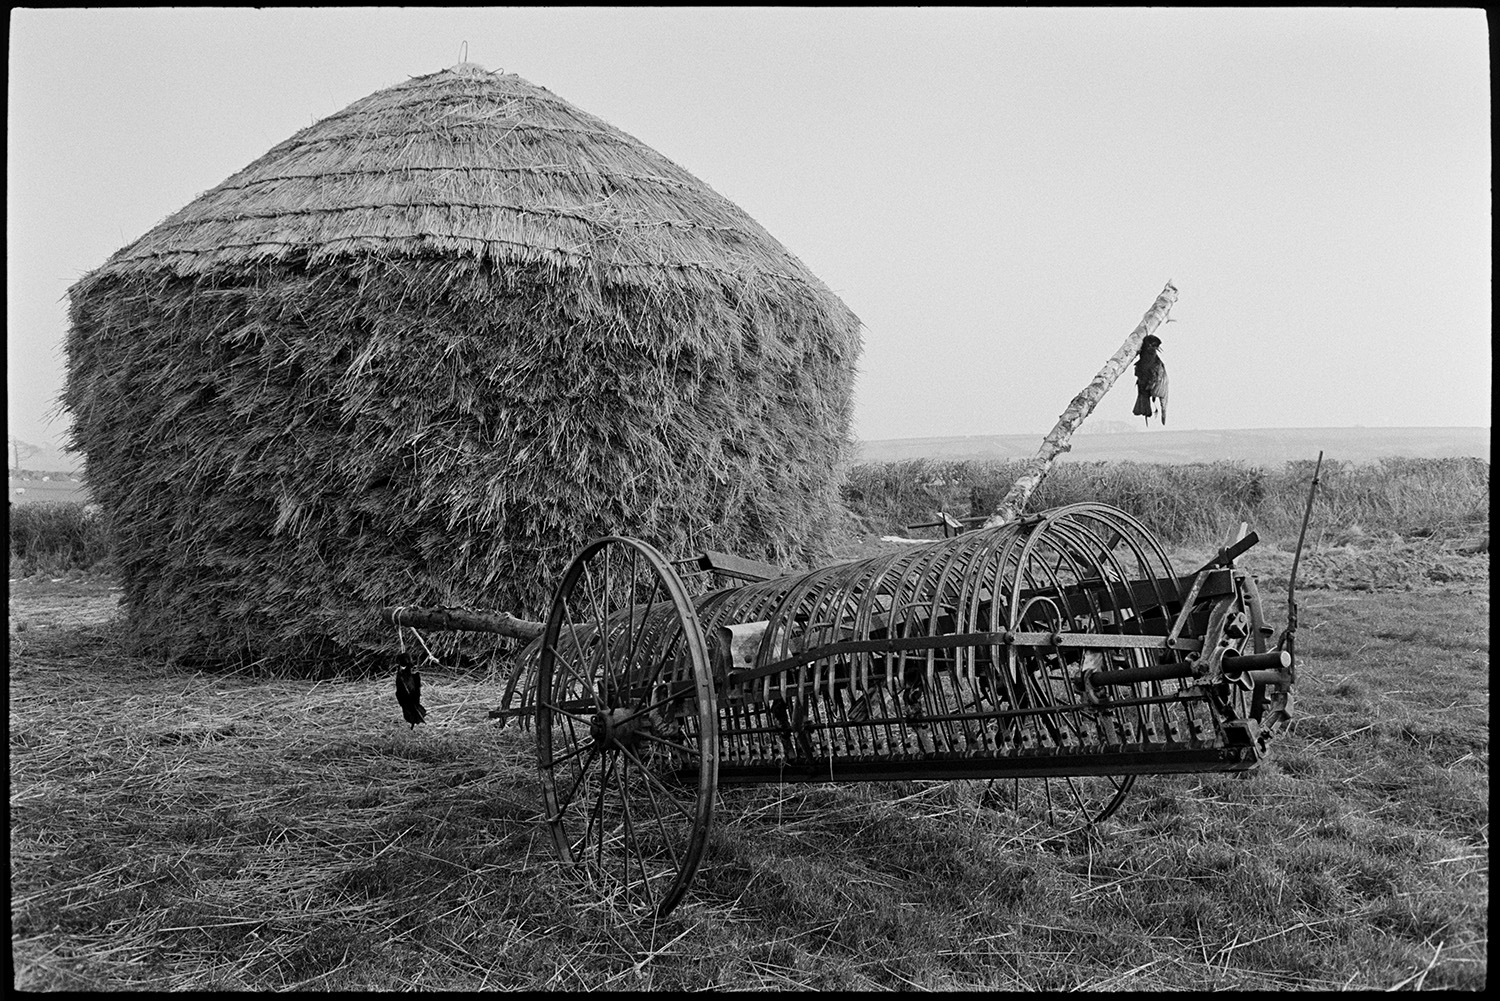 Thatched rick, old farm machinery. 
[A thatched wheat rick in a field at Westacott, Riddlecombe. A piece of farm machinery is parked in front of the rick and has two dead birds hung from it.]